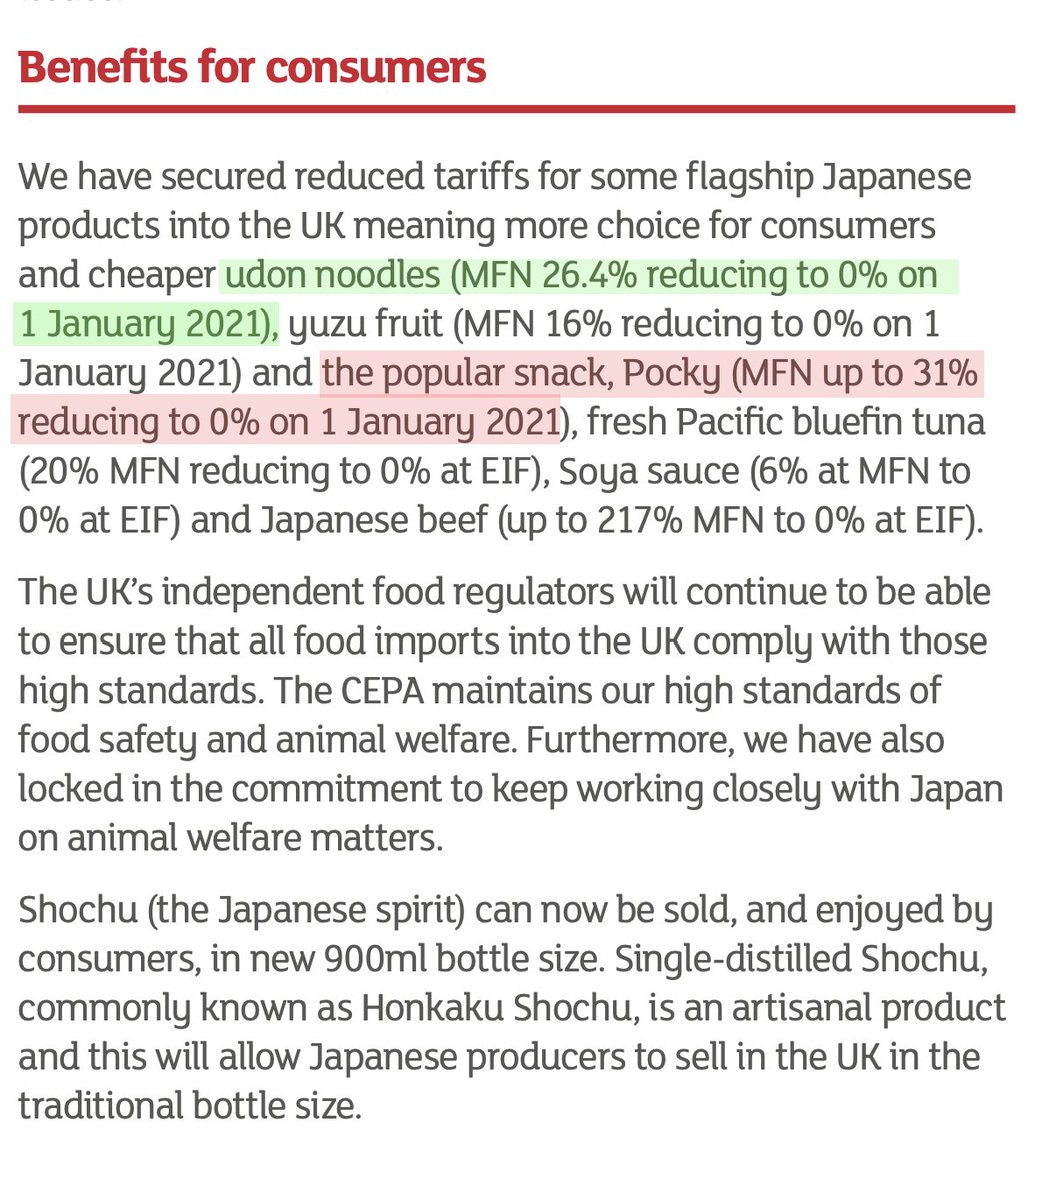 UK-Japan CEPA again.The DTI have published this guide. A few points.Obviously, first of all, it's not "reduced" as from now to Dec 31, it's 0% due to the EU EPA. So there's no reducing going on.But what's this here?Udon noodles, Pocky etc. https://assets.publishing.service.gov.uk/government/uploads/system/uploads/attachment_data/file/929065/UK-Japan-Trade-Agreement-sectoral-benefits.pdf1/5